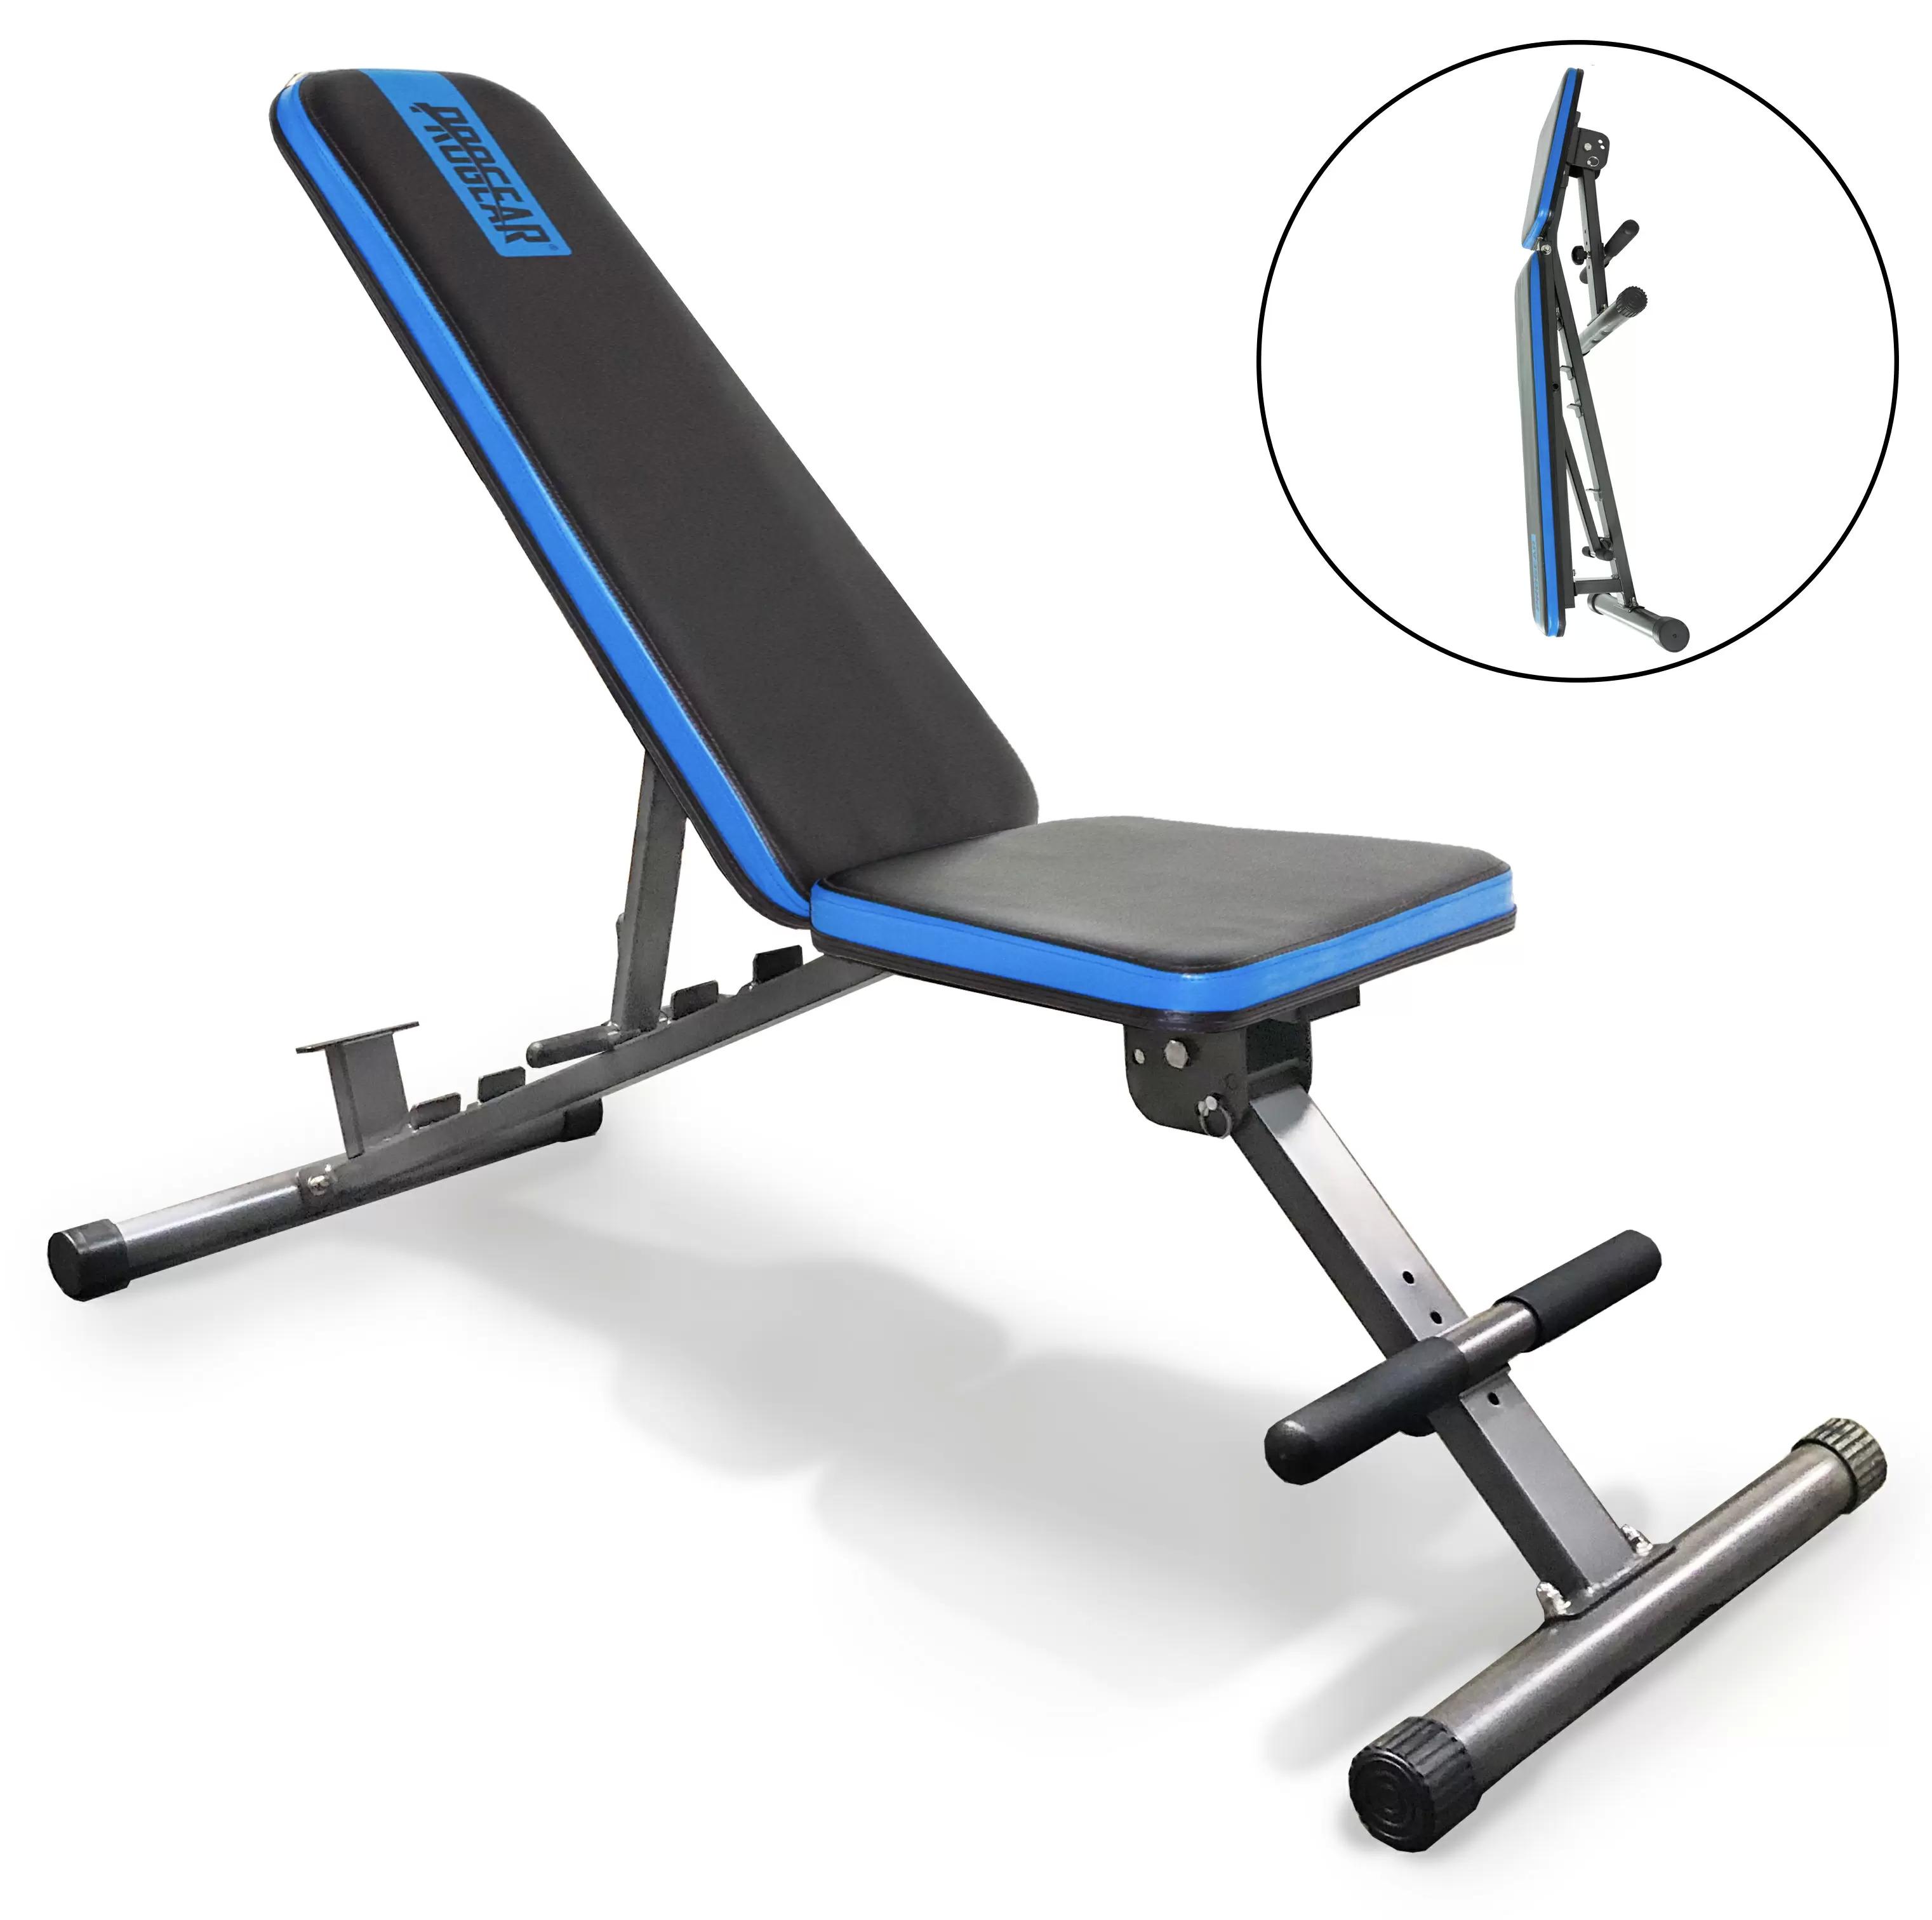 ProGear 1300 12-Position Adjustable Weight Bench for $89 Shipped